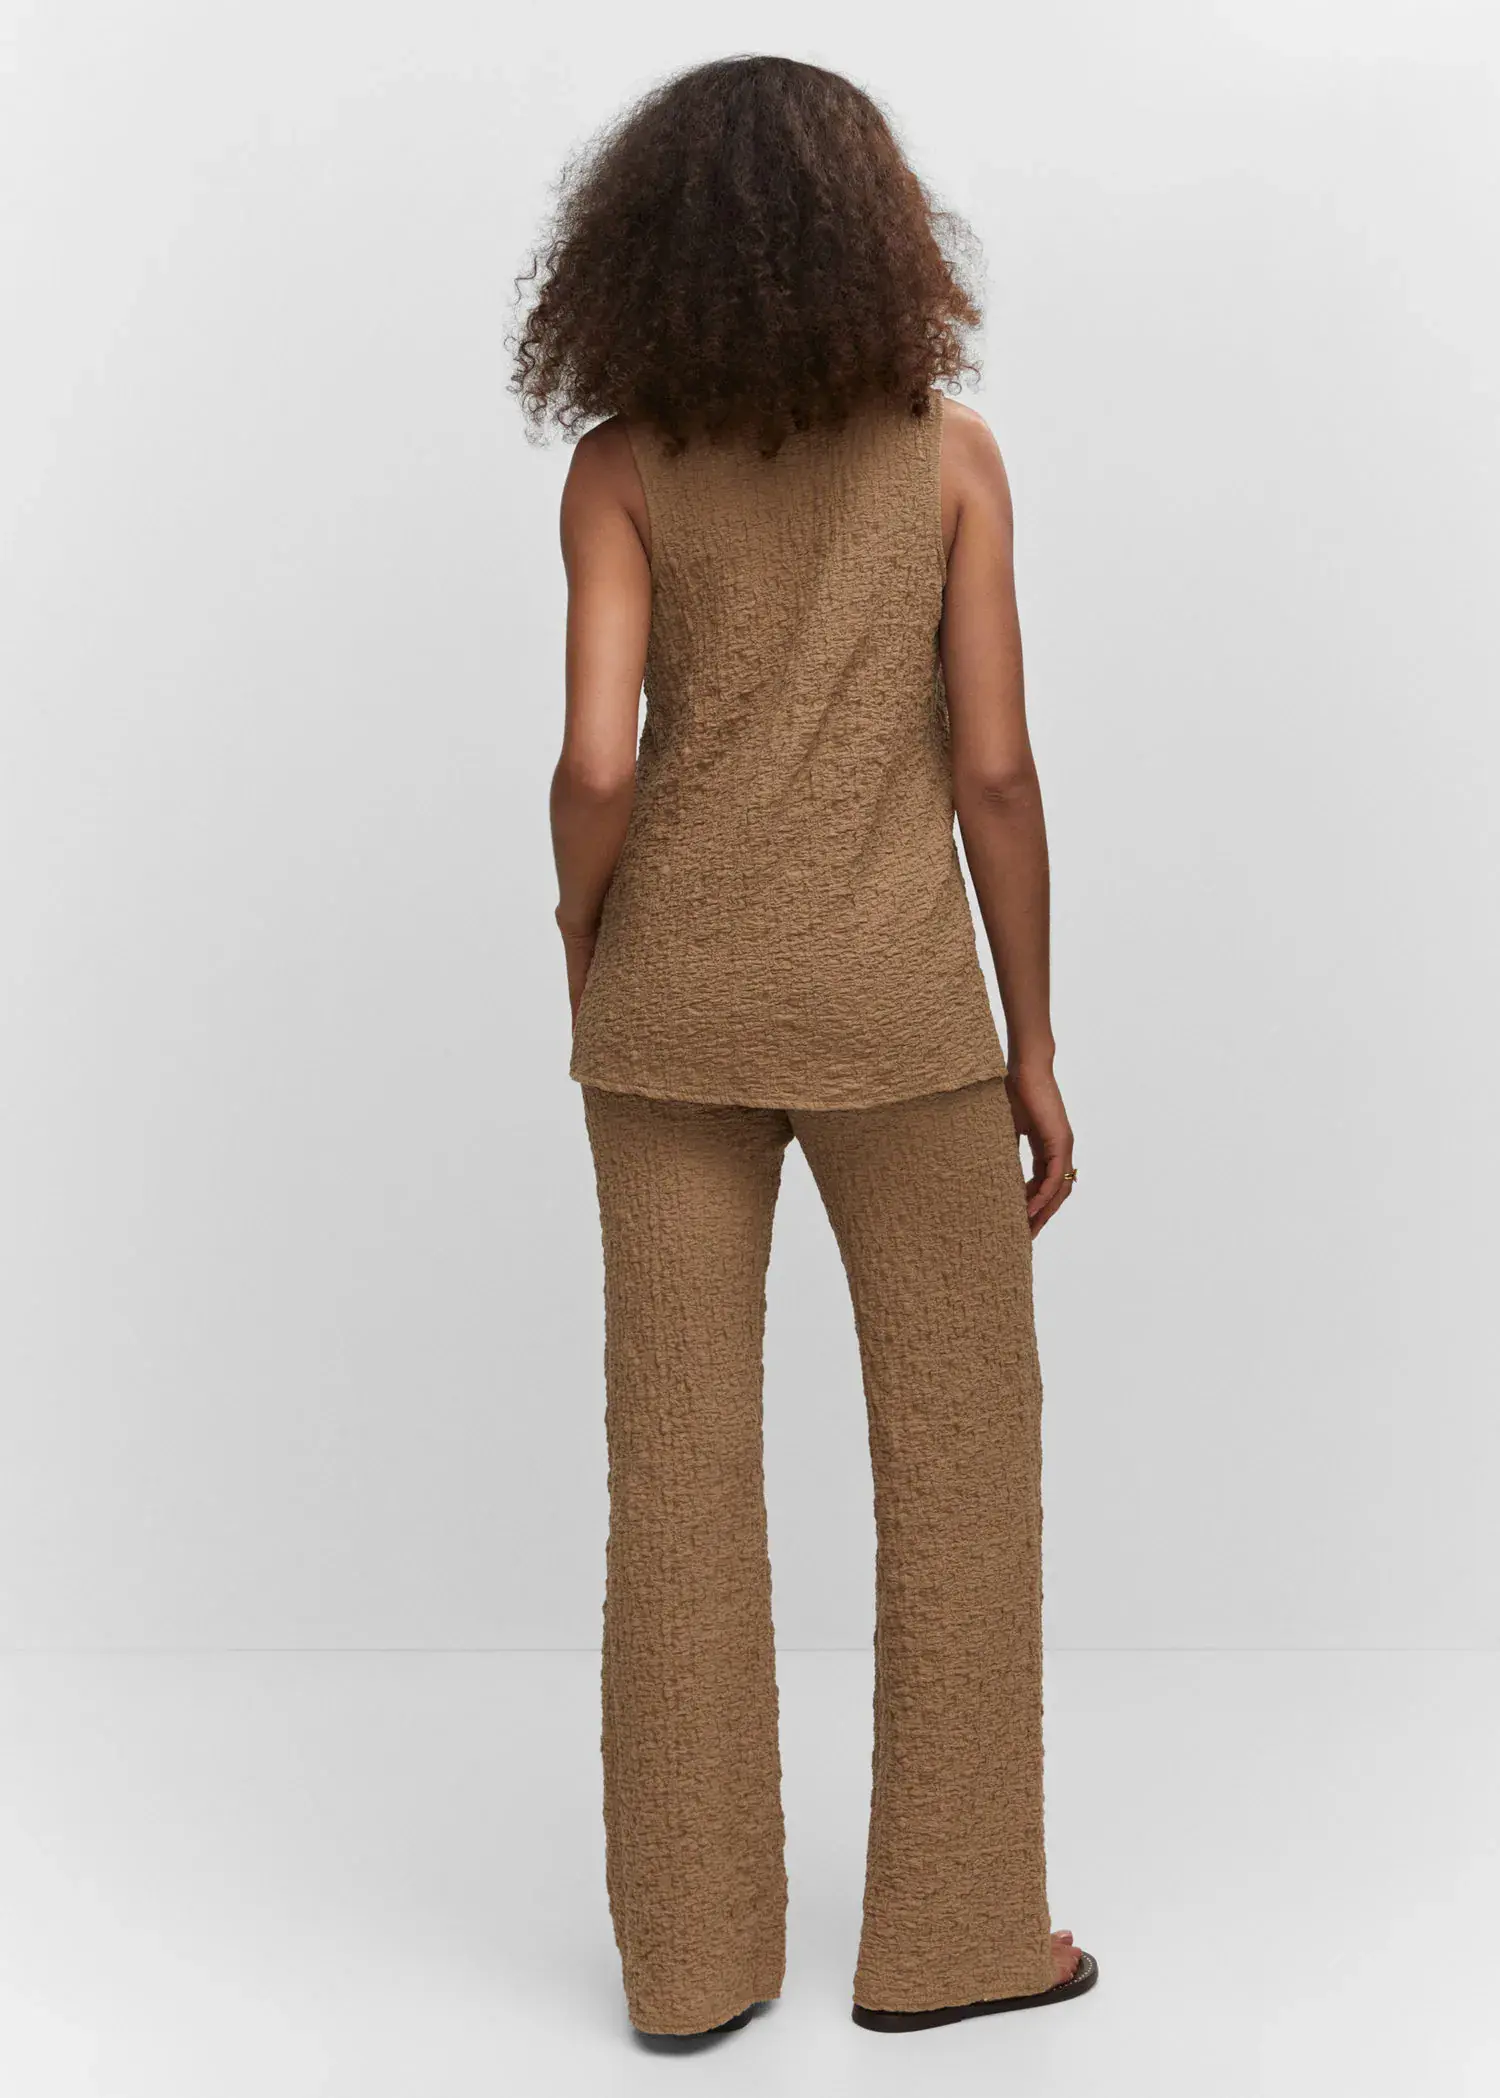 Mango Textured polo neck vest. a woman in a tan outfit standing in front of a white wall. 